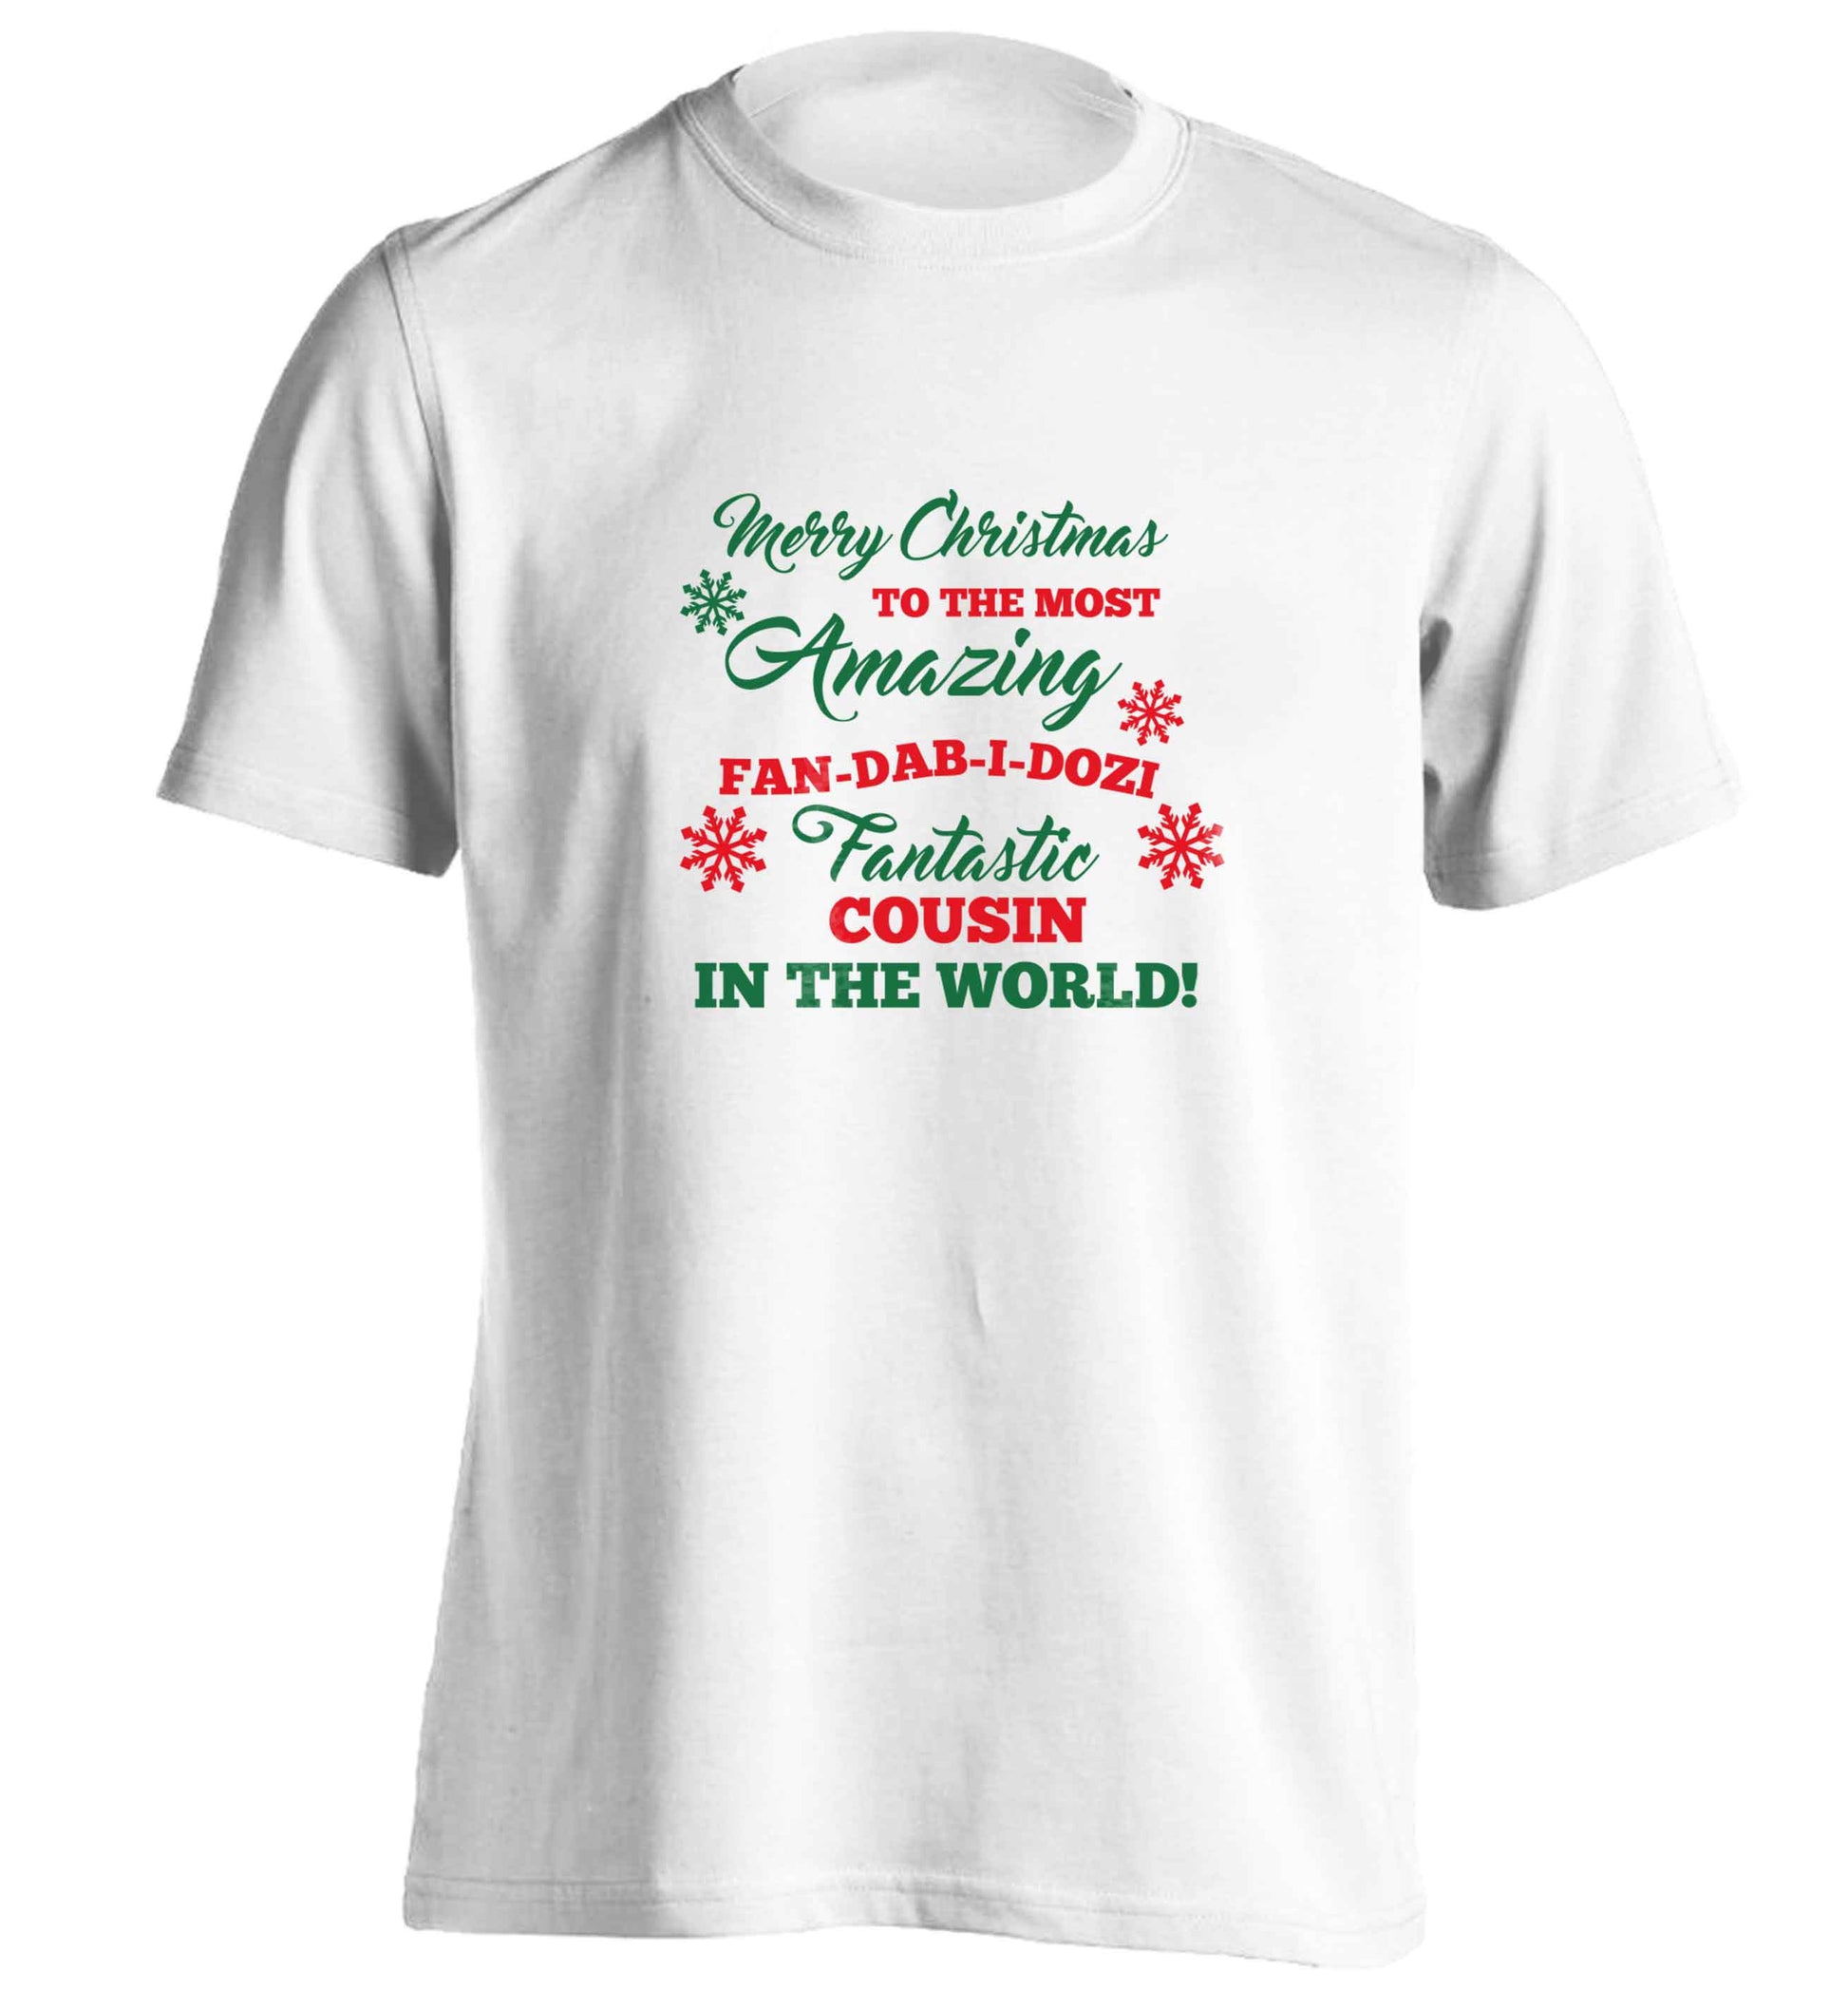 Merry Christmas to the most amazing fan-dab-i-dozi fantasic Cousin in the world adults unisex white Tshirt 2XL